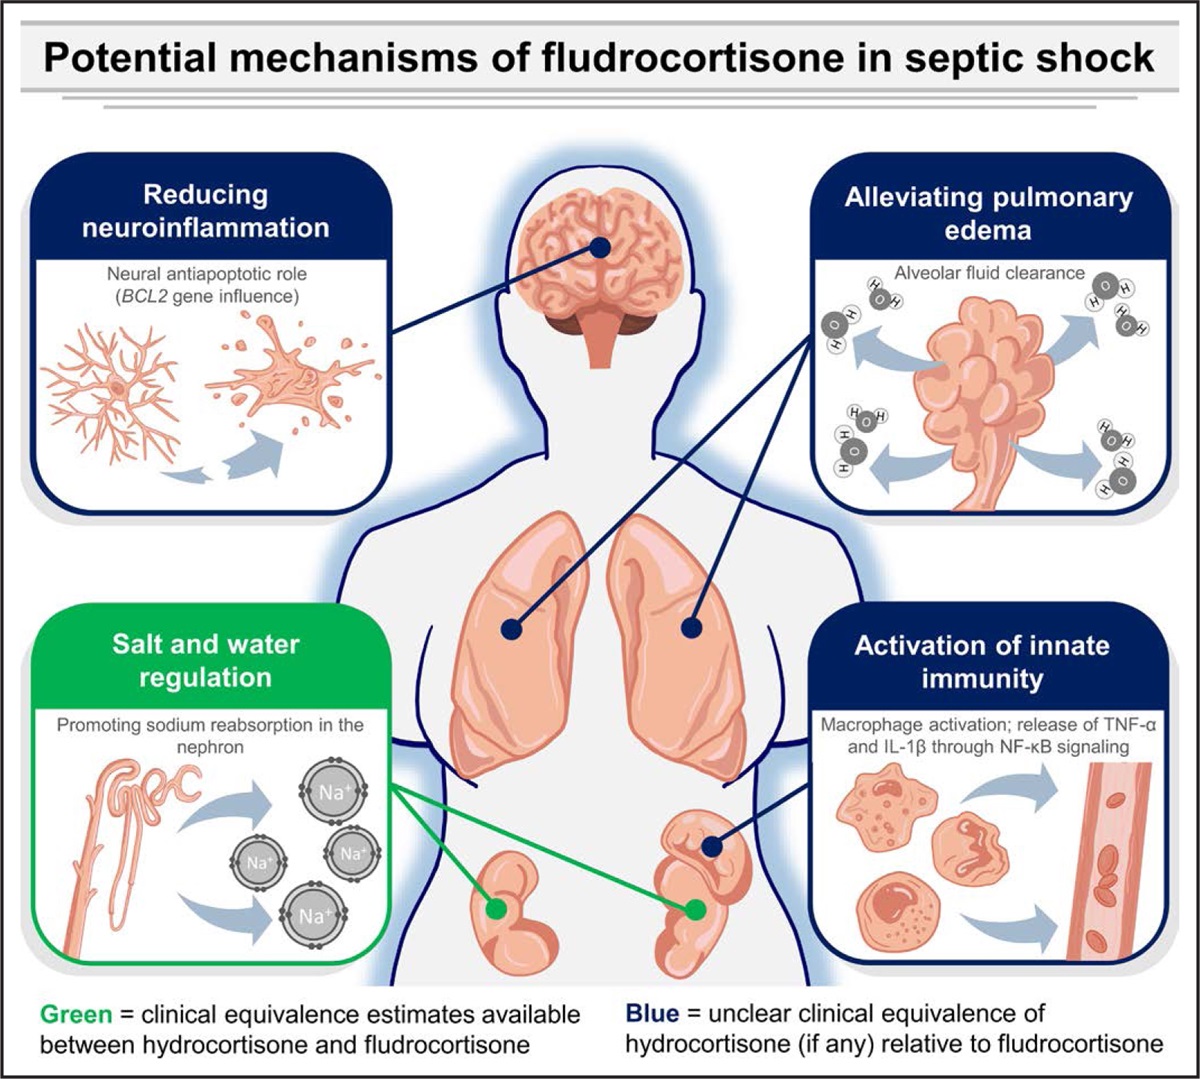 Should Fludrocortisone be Added to Hydrocortisone in Septic Shock? Probably Yes, Based on Available Evidence*